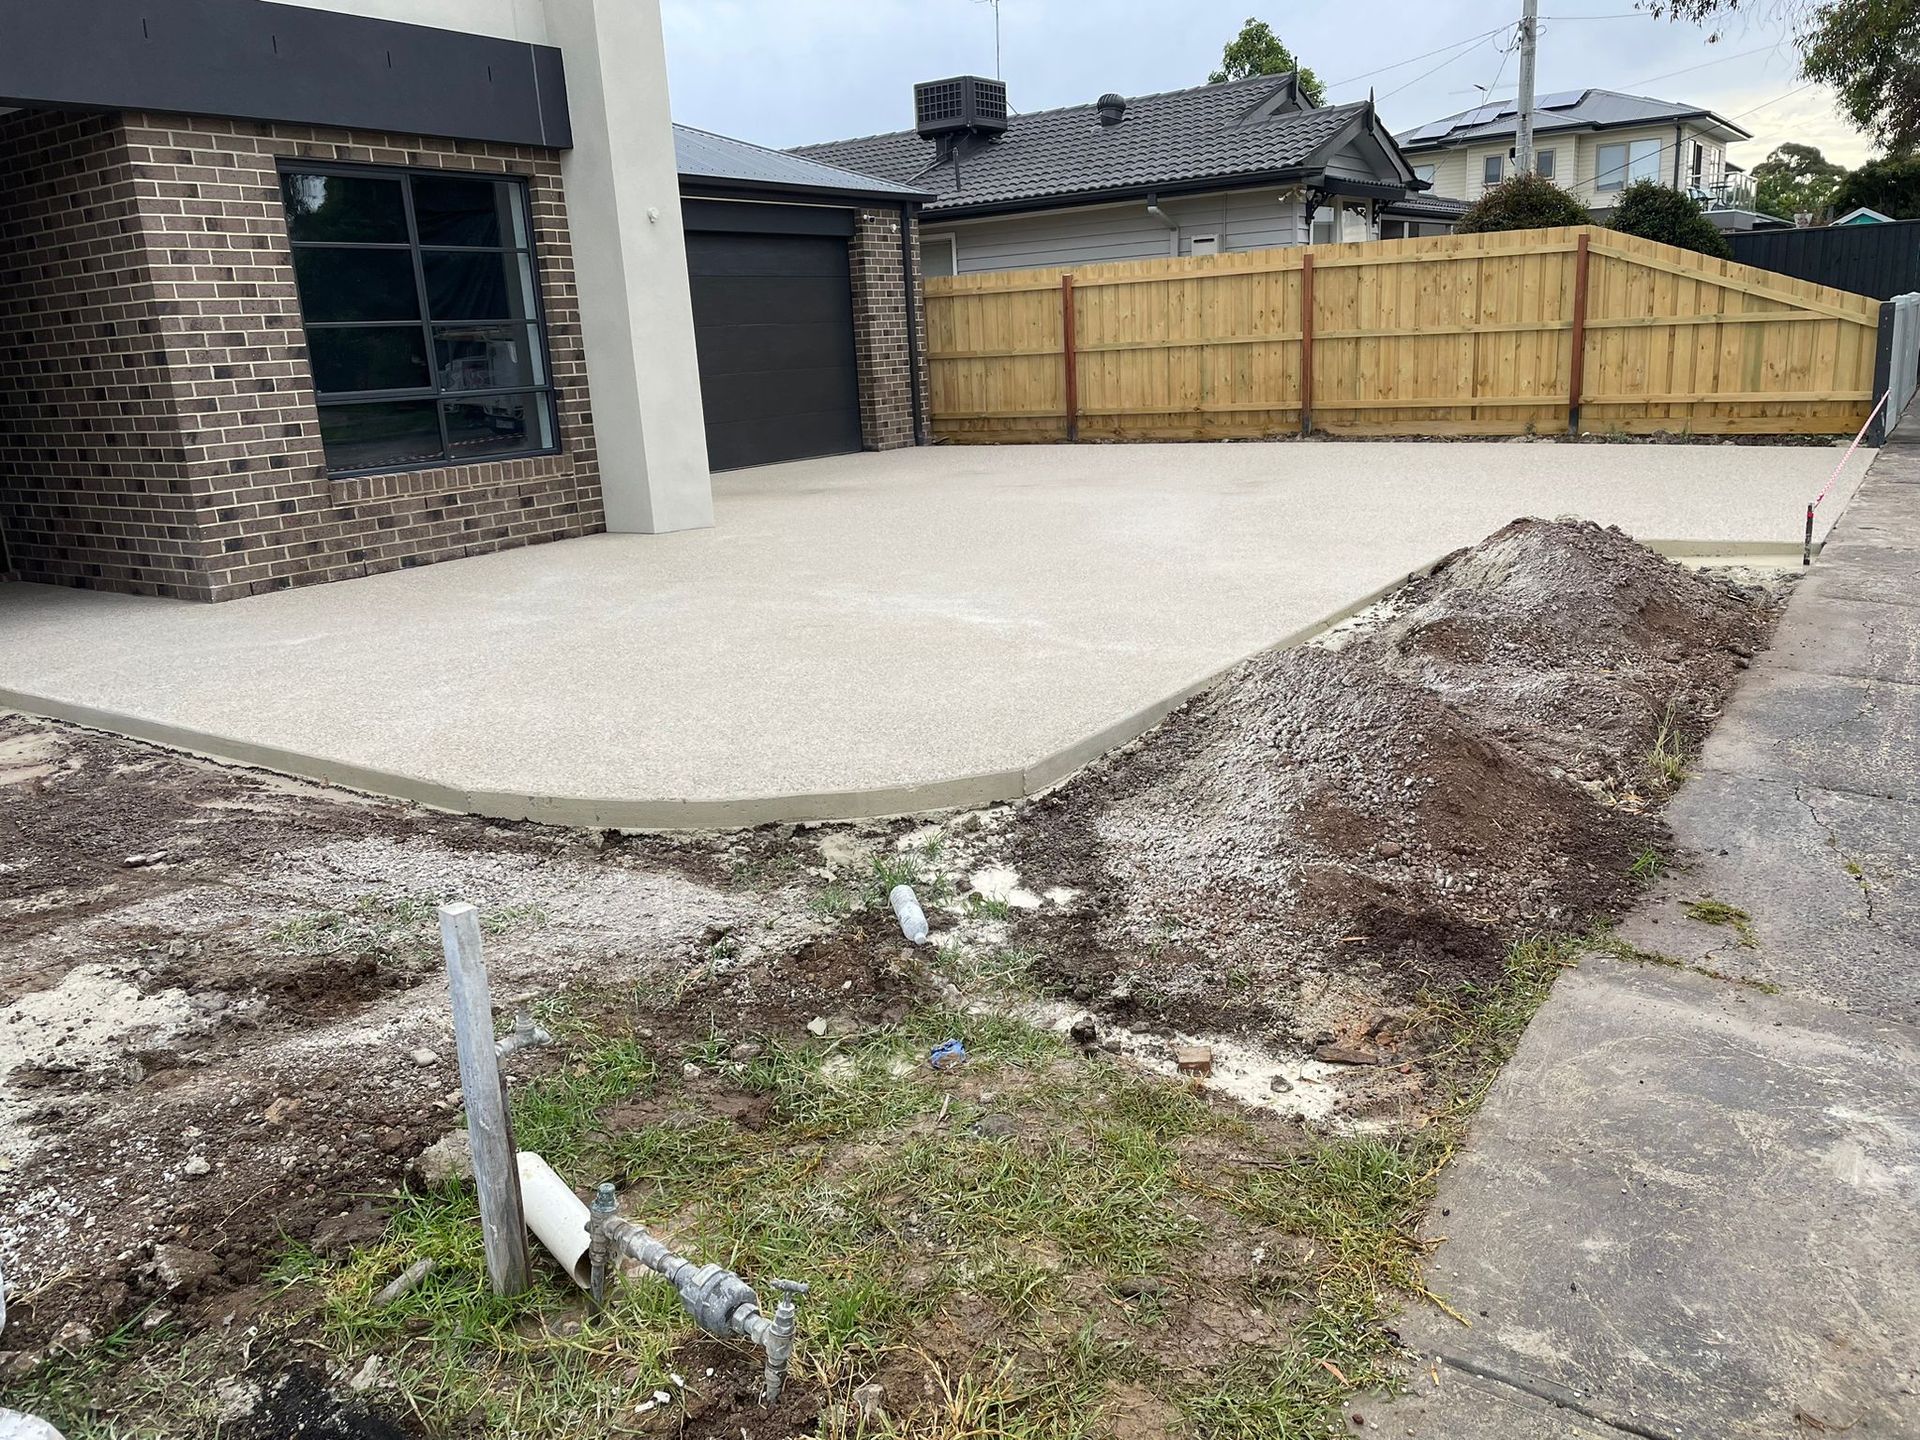 Newly repaired concrete driveway of a residential property in Melton VIC.